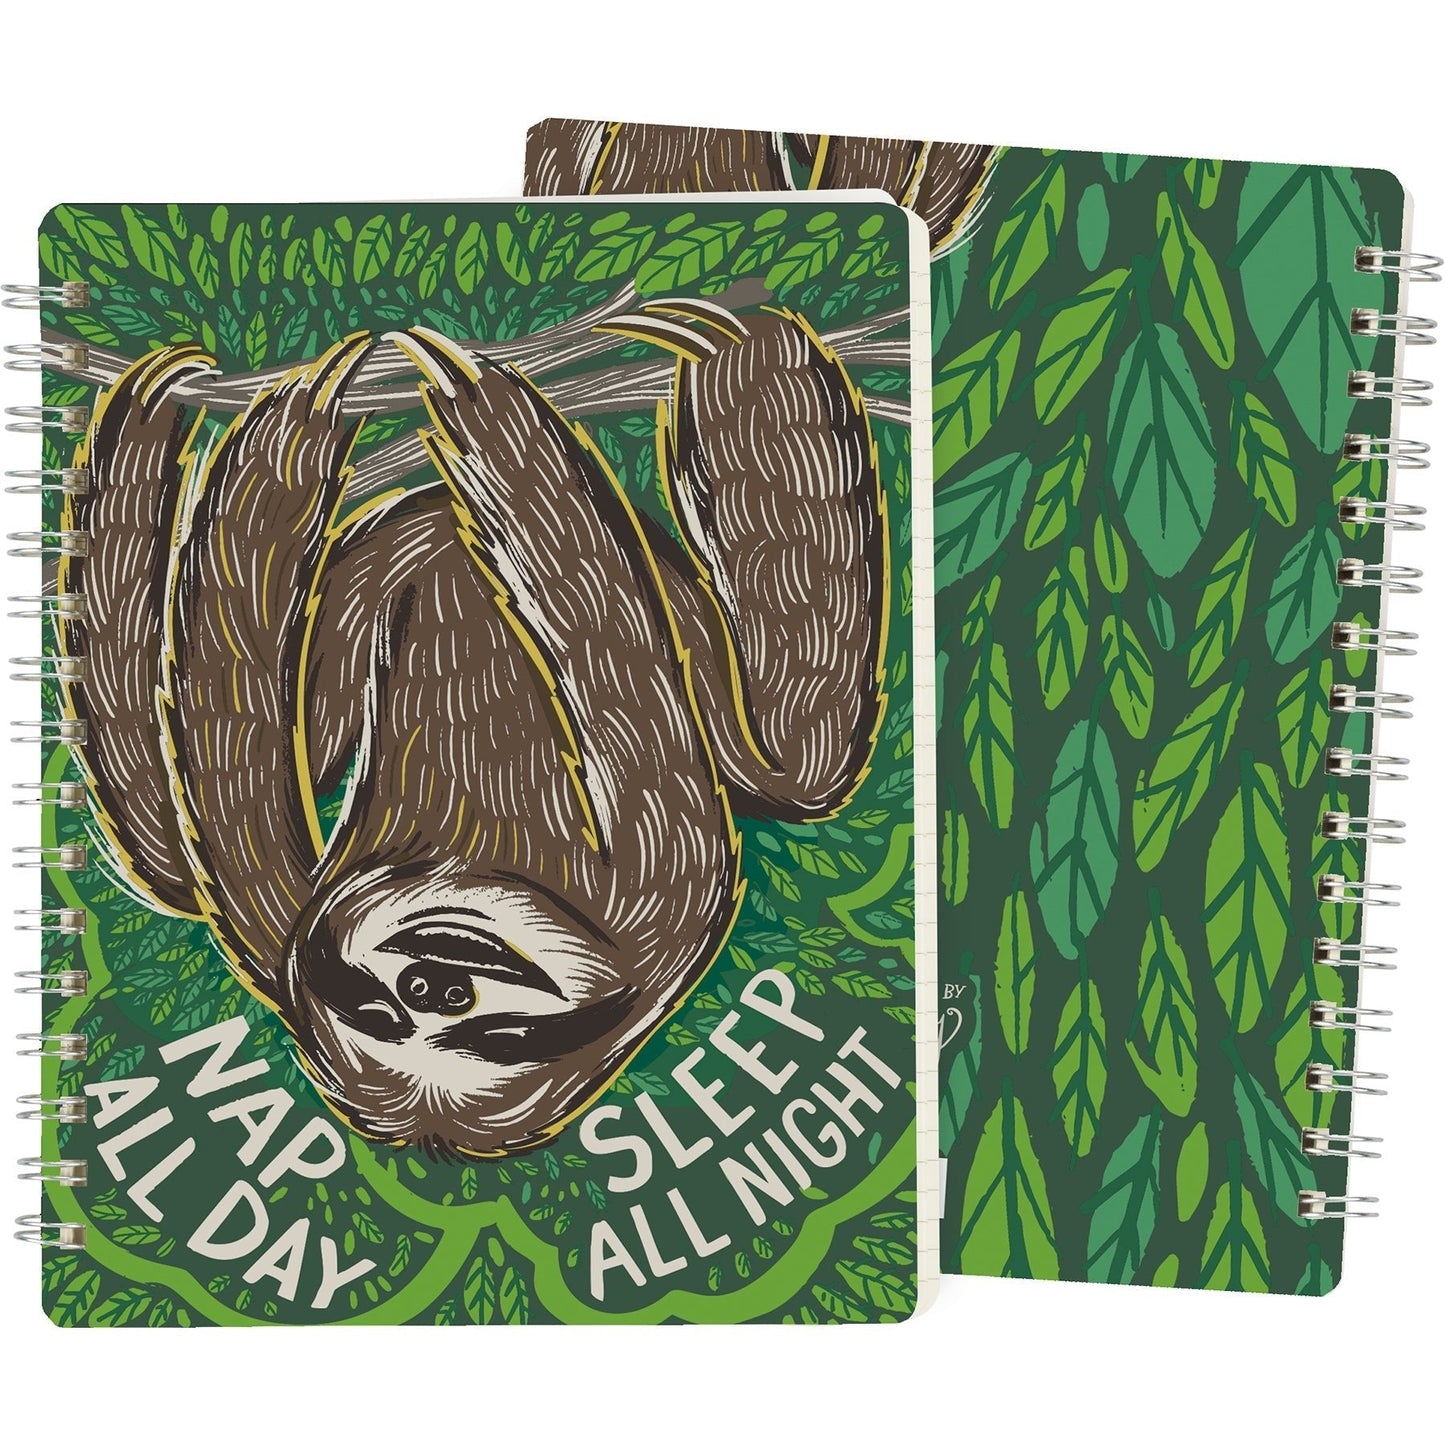 Sloth Nap All Day Sleep All Night Spiral Notebook | 120 Lined Pages | 9" x 7"